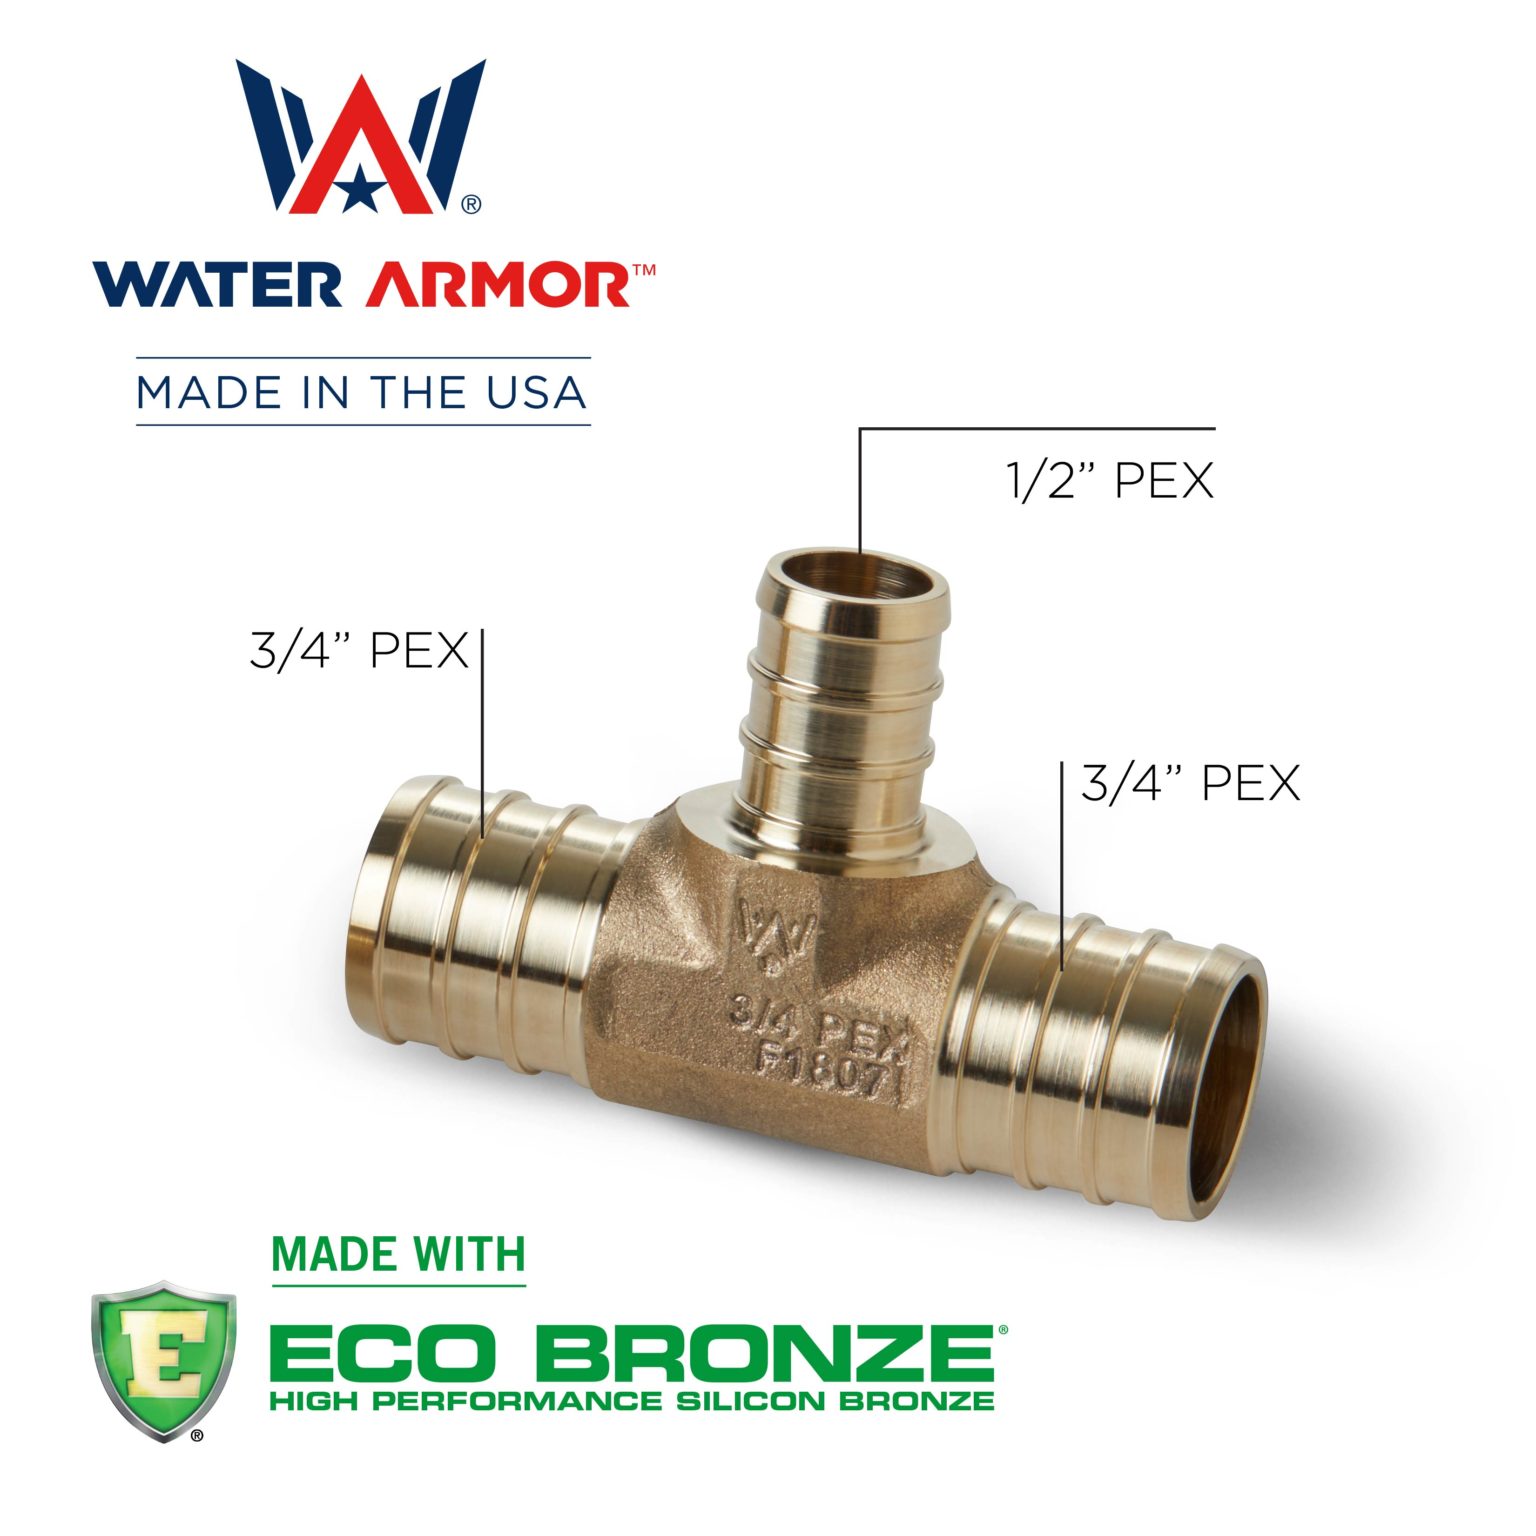 3/4" x 3/4" x 1/2" Water Armor Lead Free PEX Reducing Tee Made With Eco Bronze